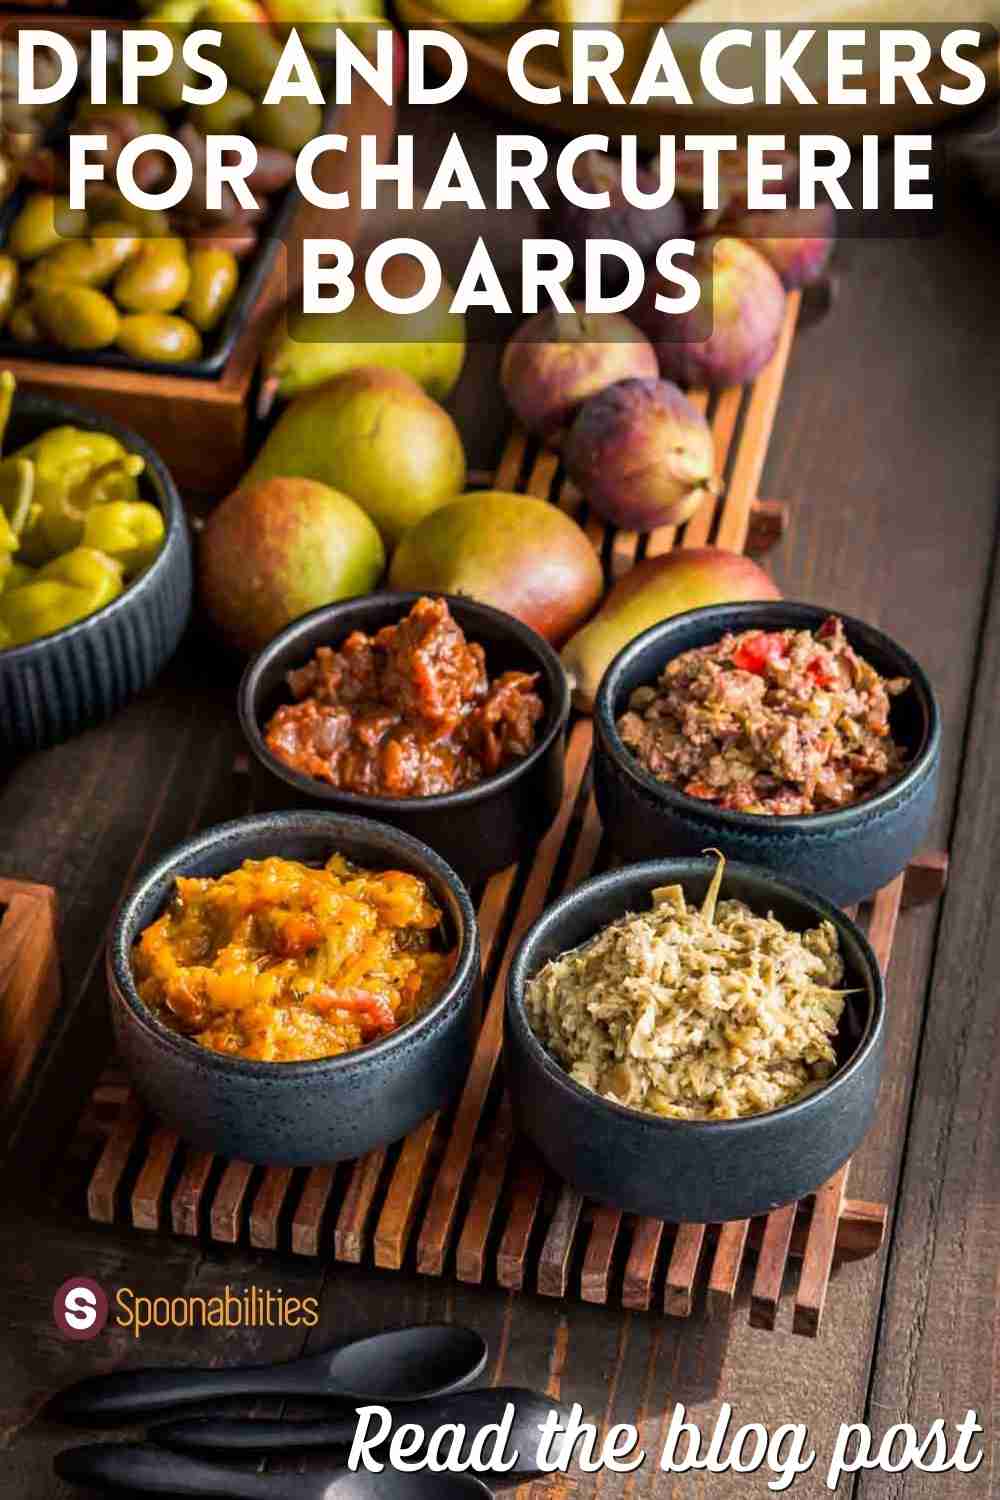 Dips and Crackers for Charcuterie Boards: Jams, Sauces, Bread, and more